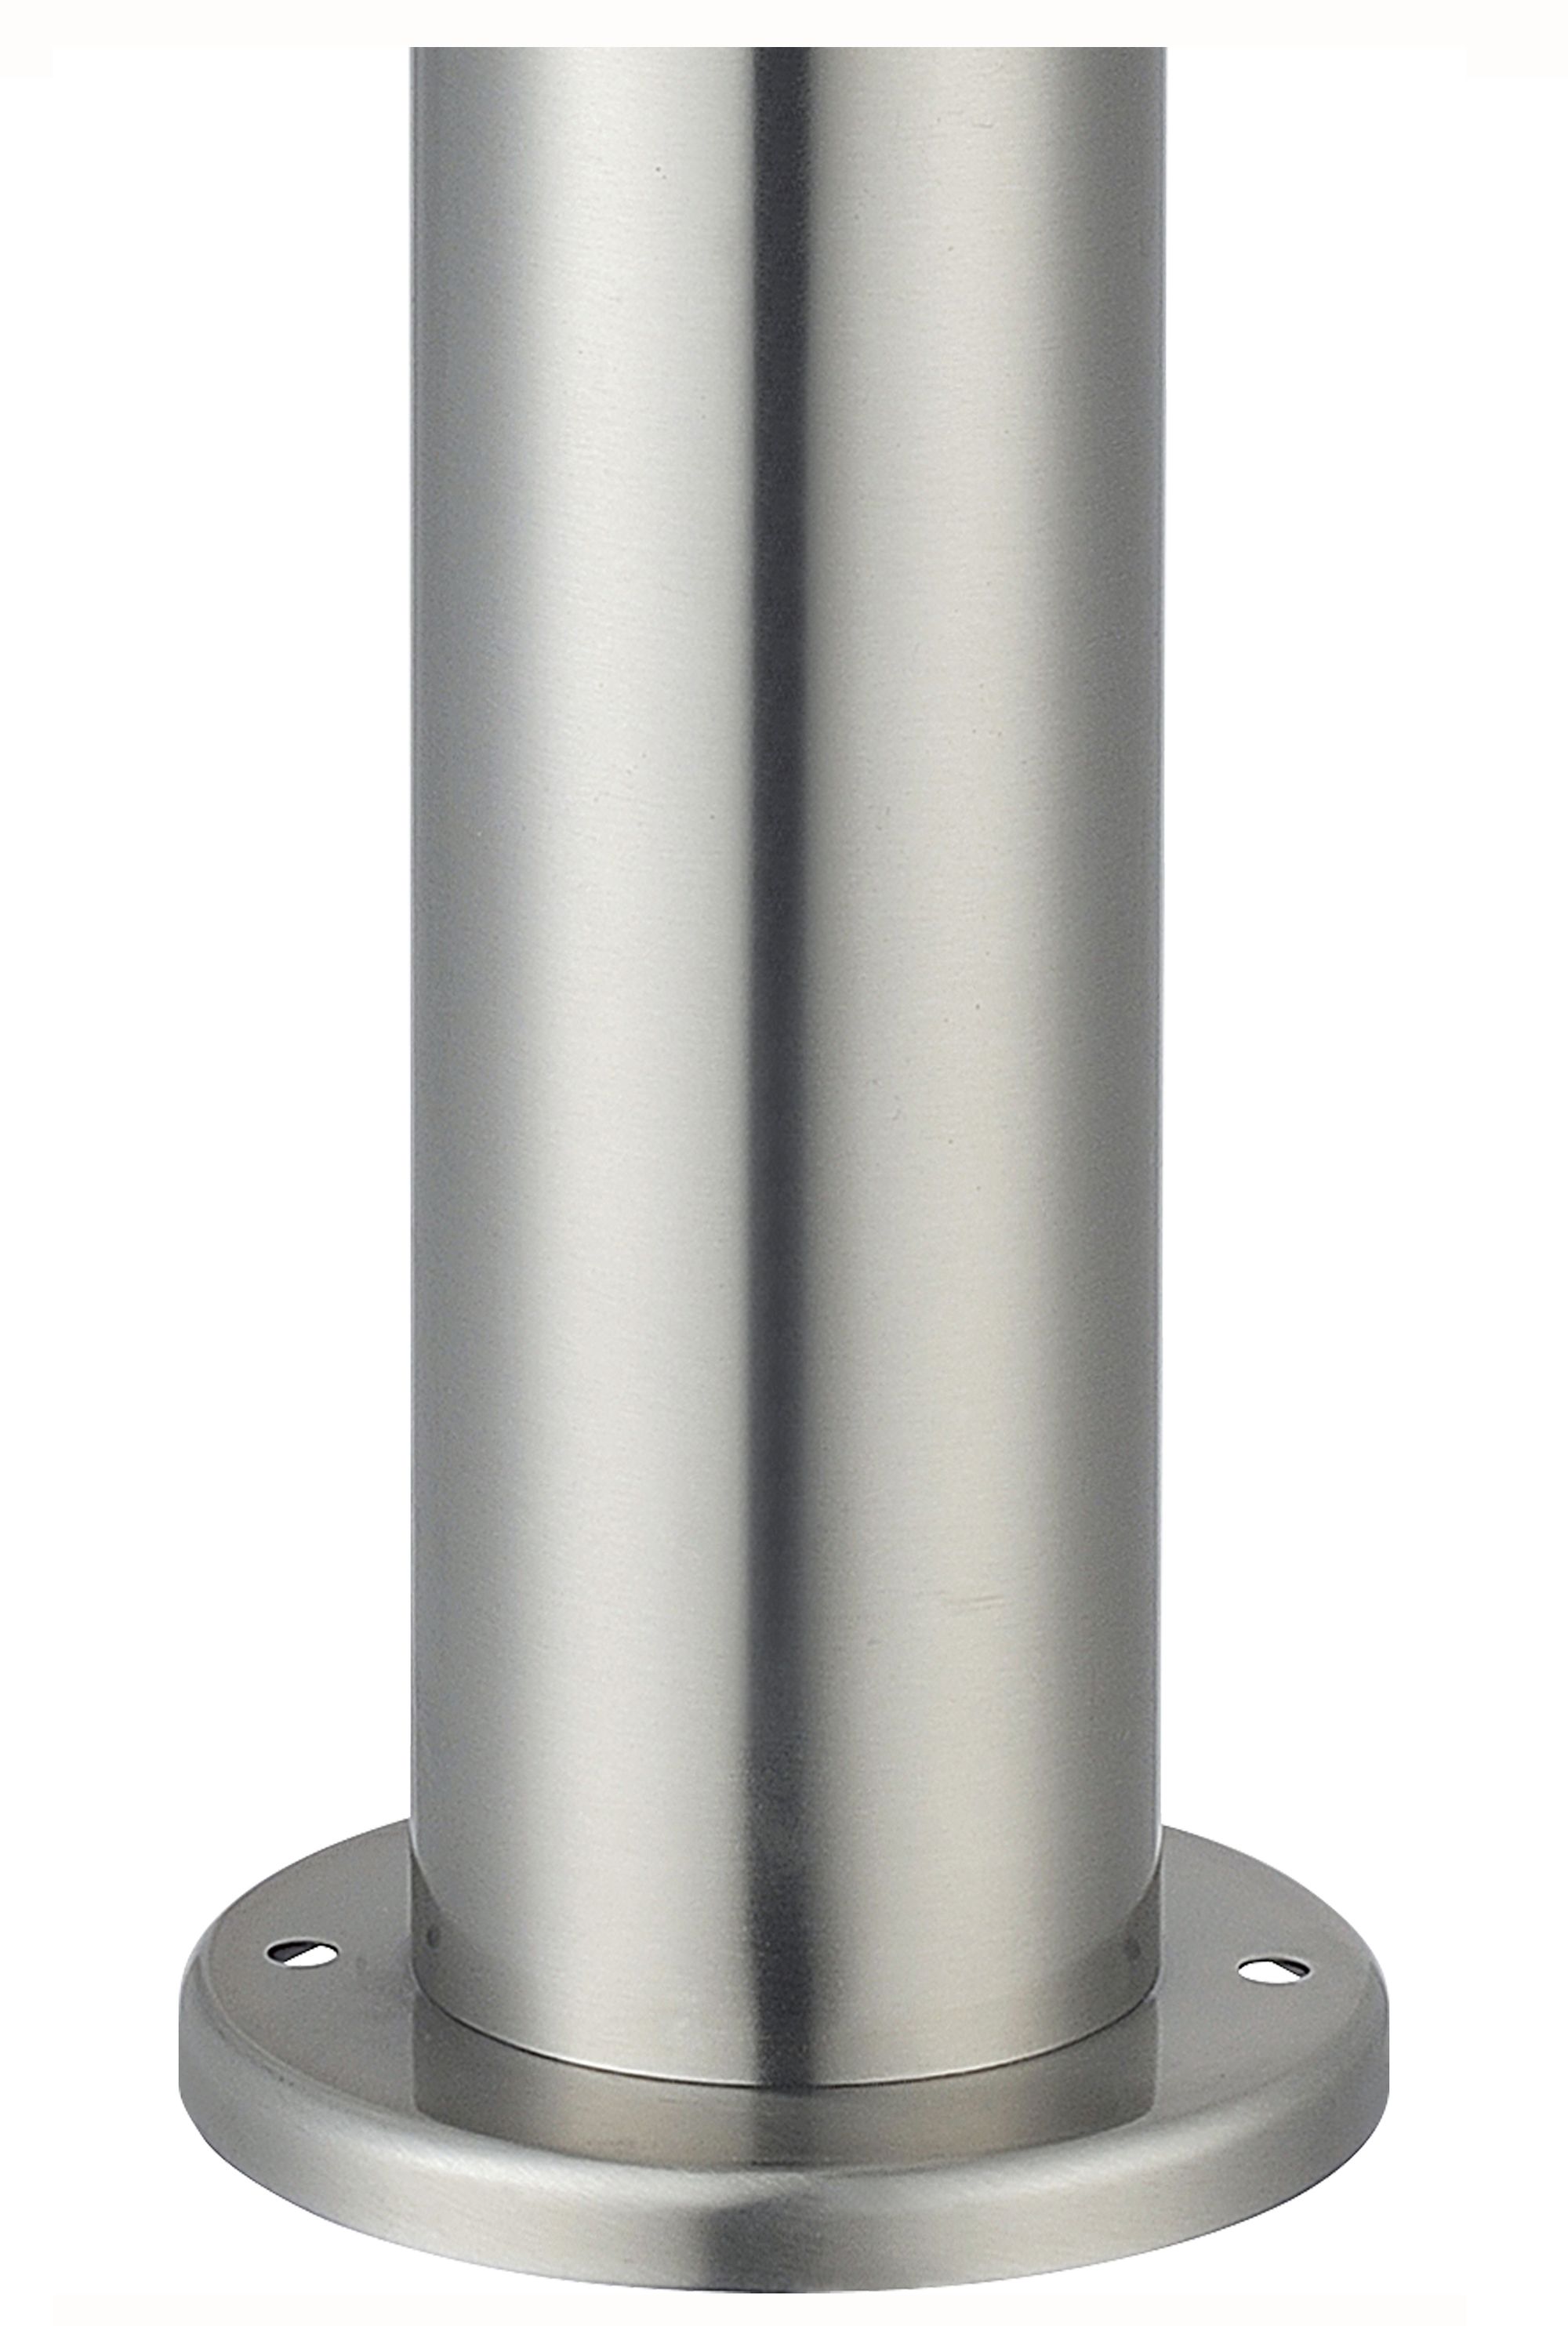 Stainless Steel Mains-powered 1 lamp Outdoor Post light (H)450mm